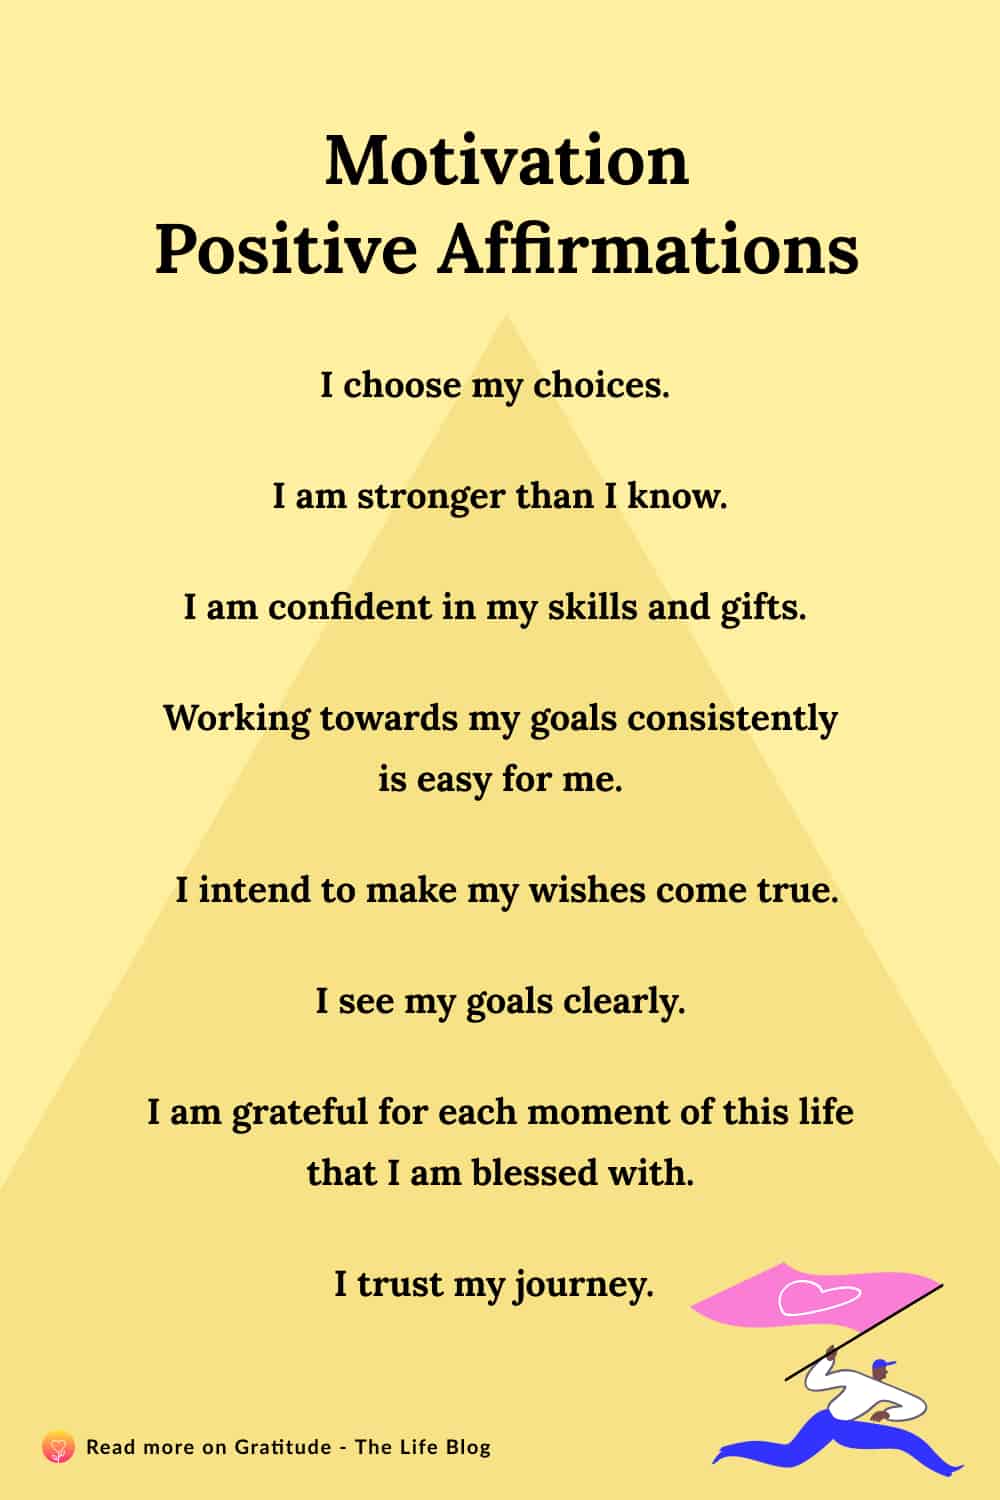 100 Motivation Affirmations to Achieve Your Dreams